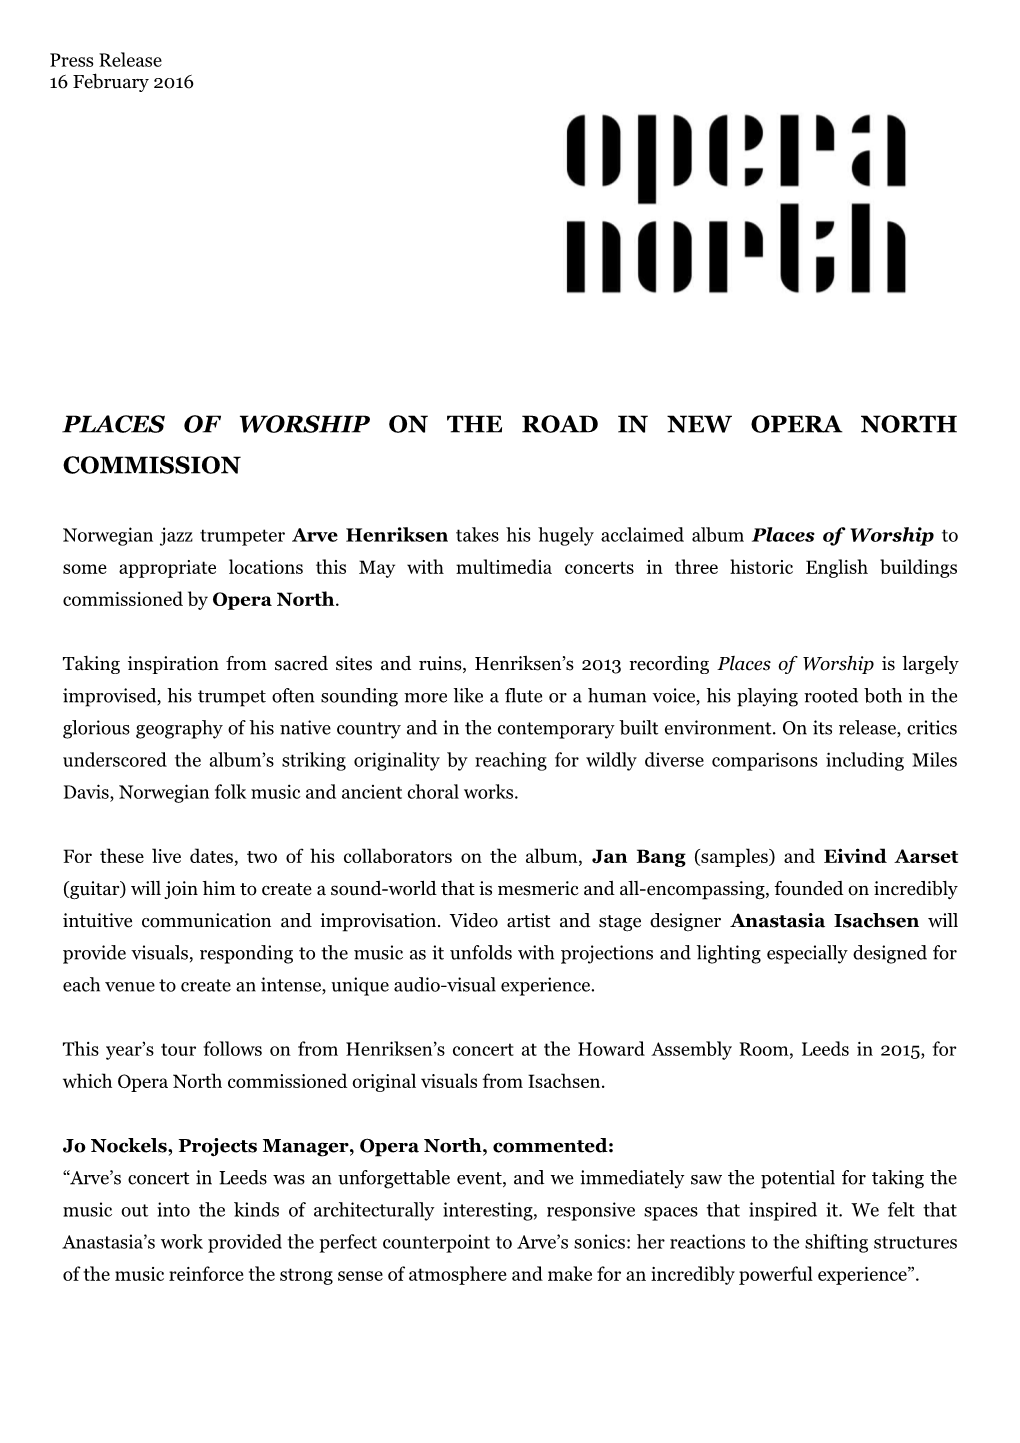 Places of Worship on the Road in New Opera North Commission